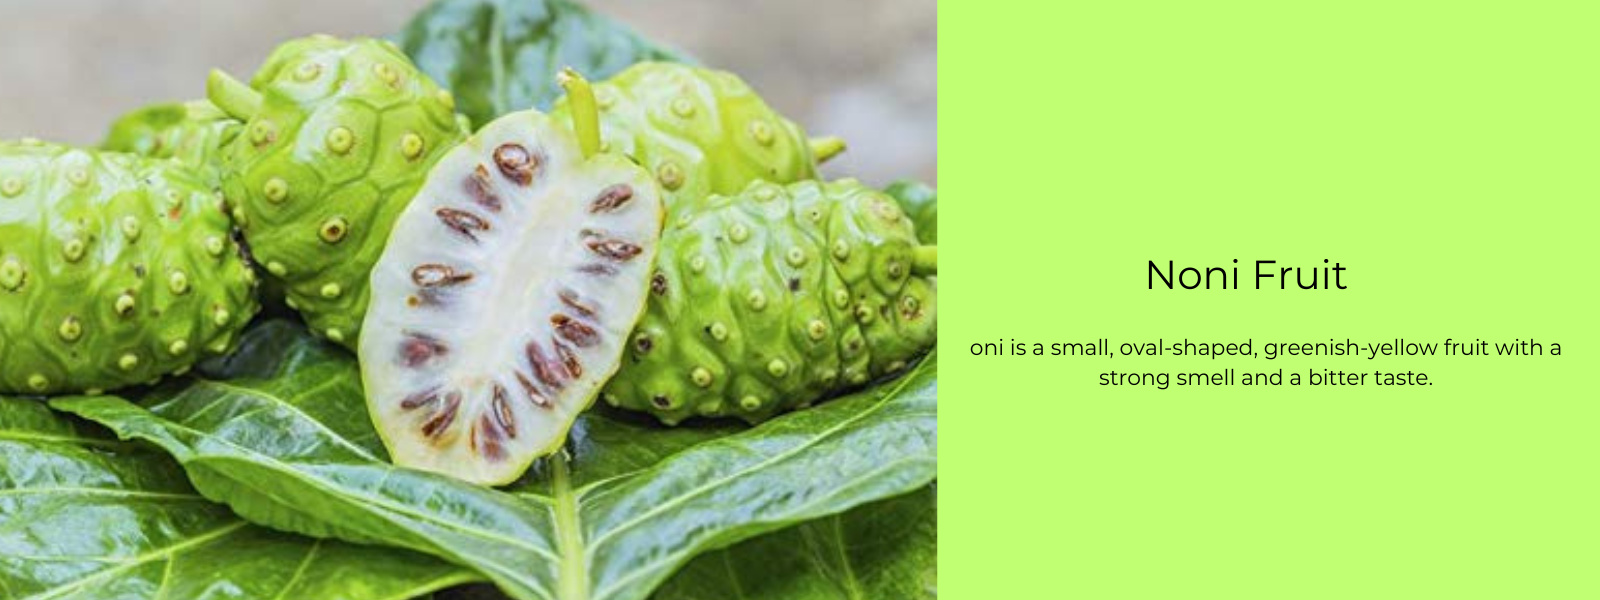 Noni Fruit – Health Benefits, Uses and Important Facts